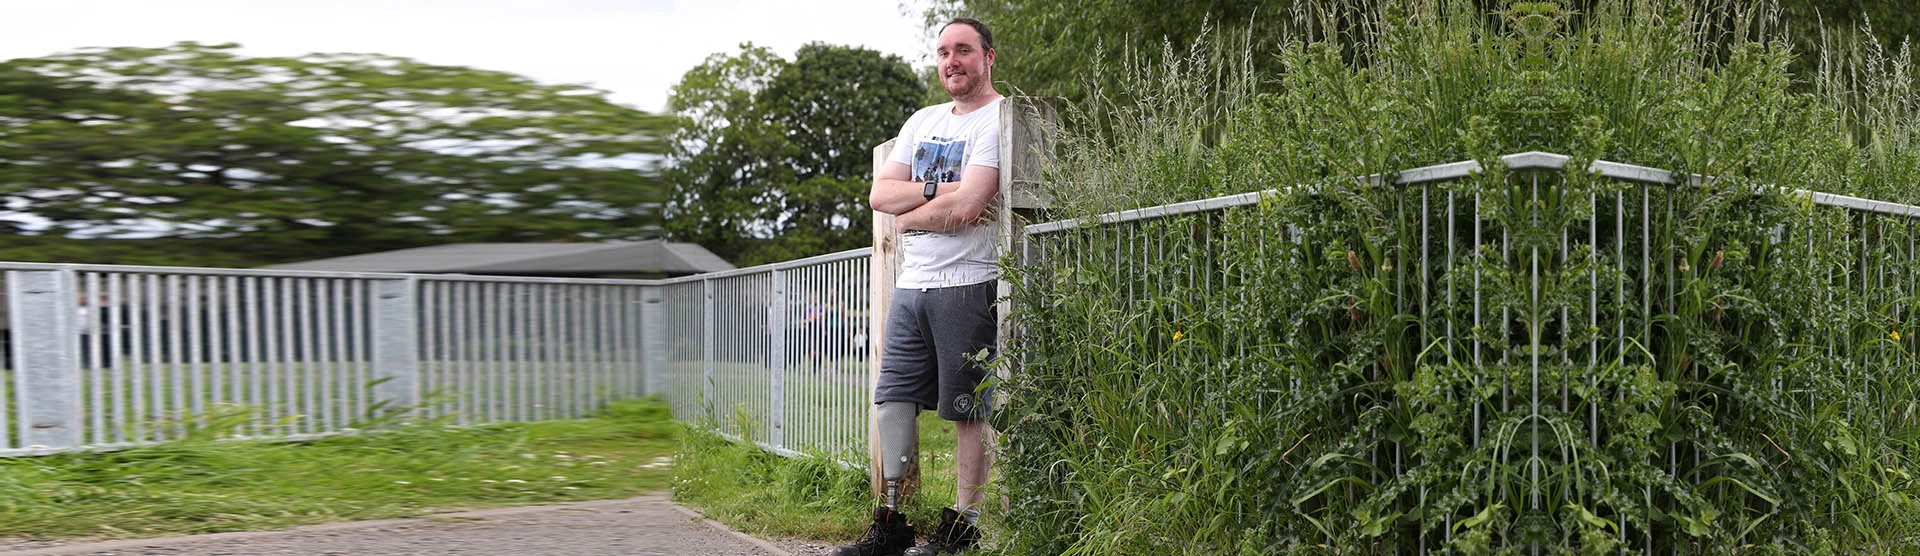 Our amputation claims client, Ben, stood in a local park. 